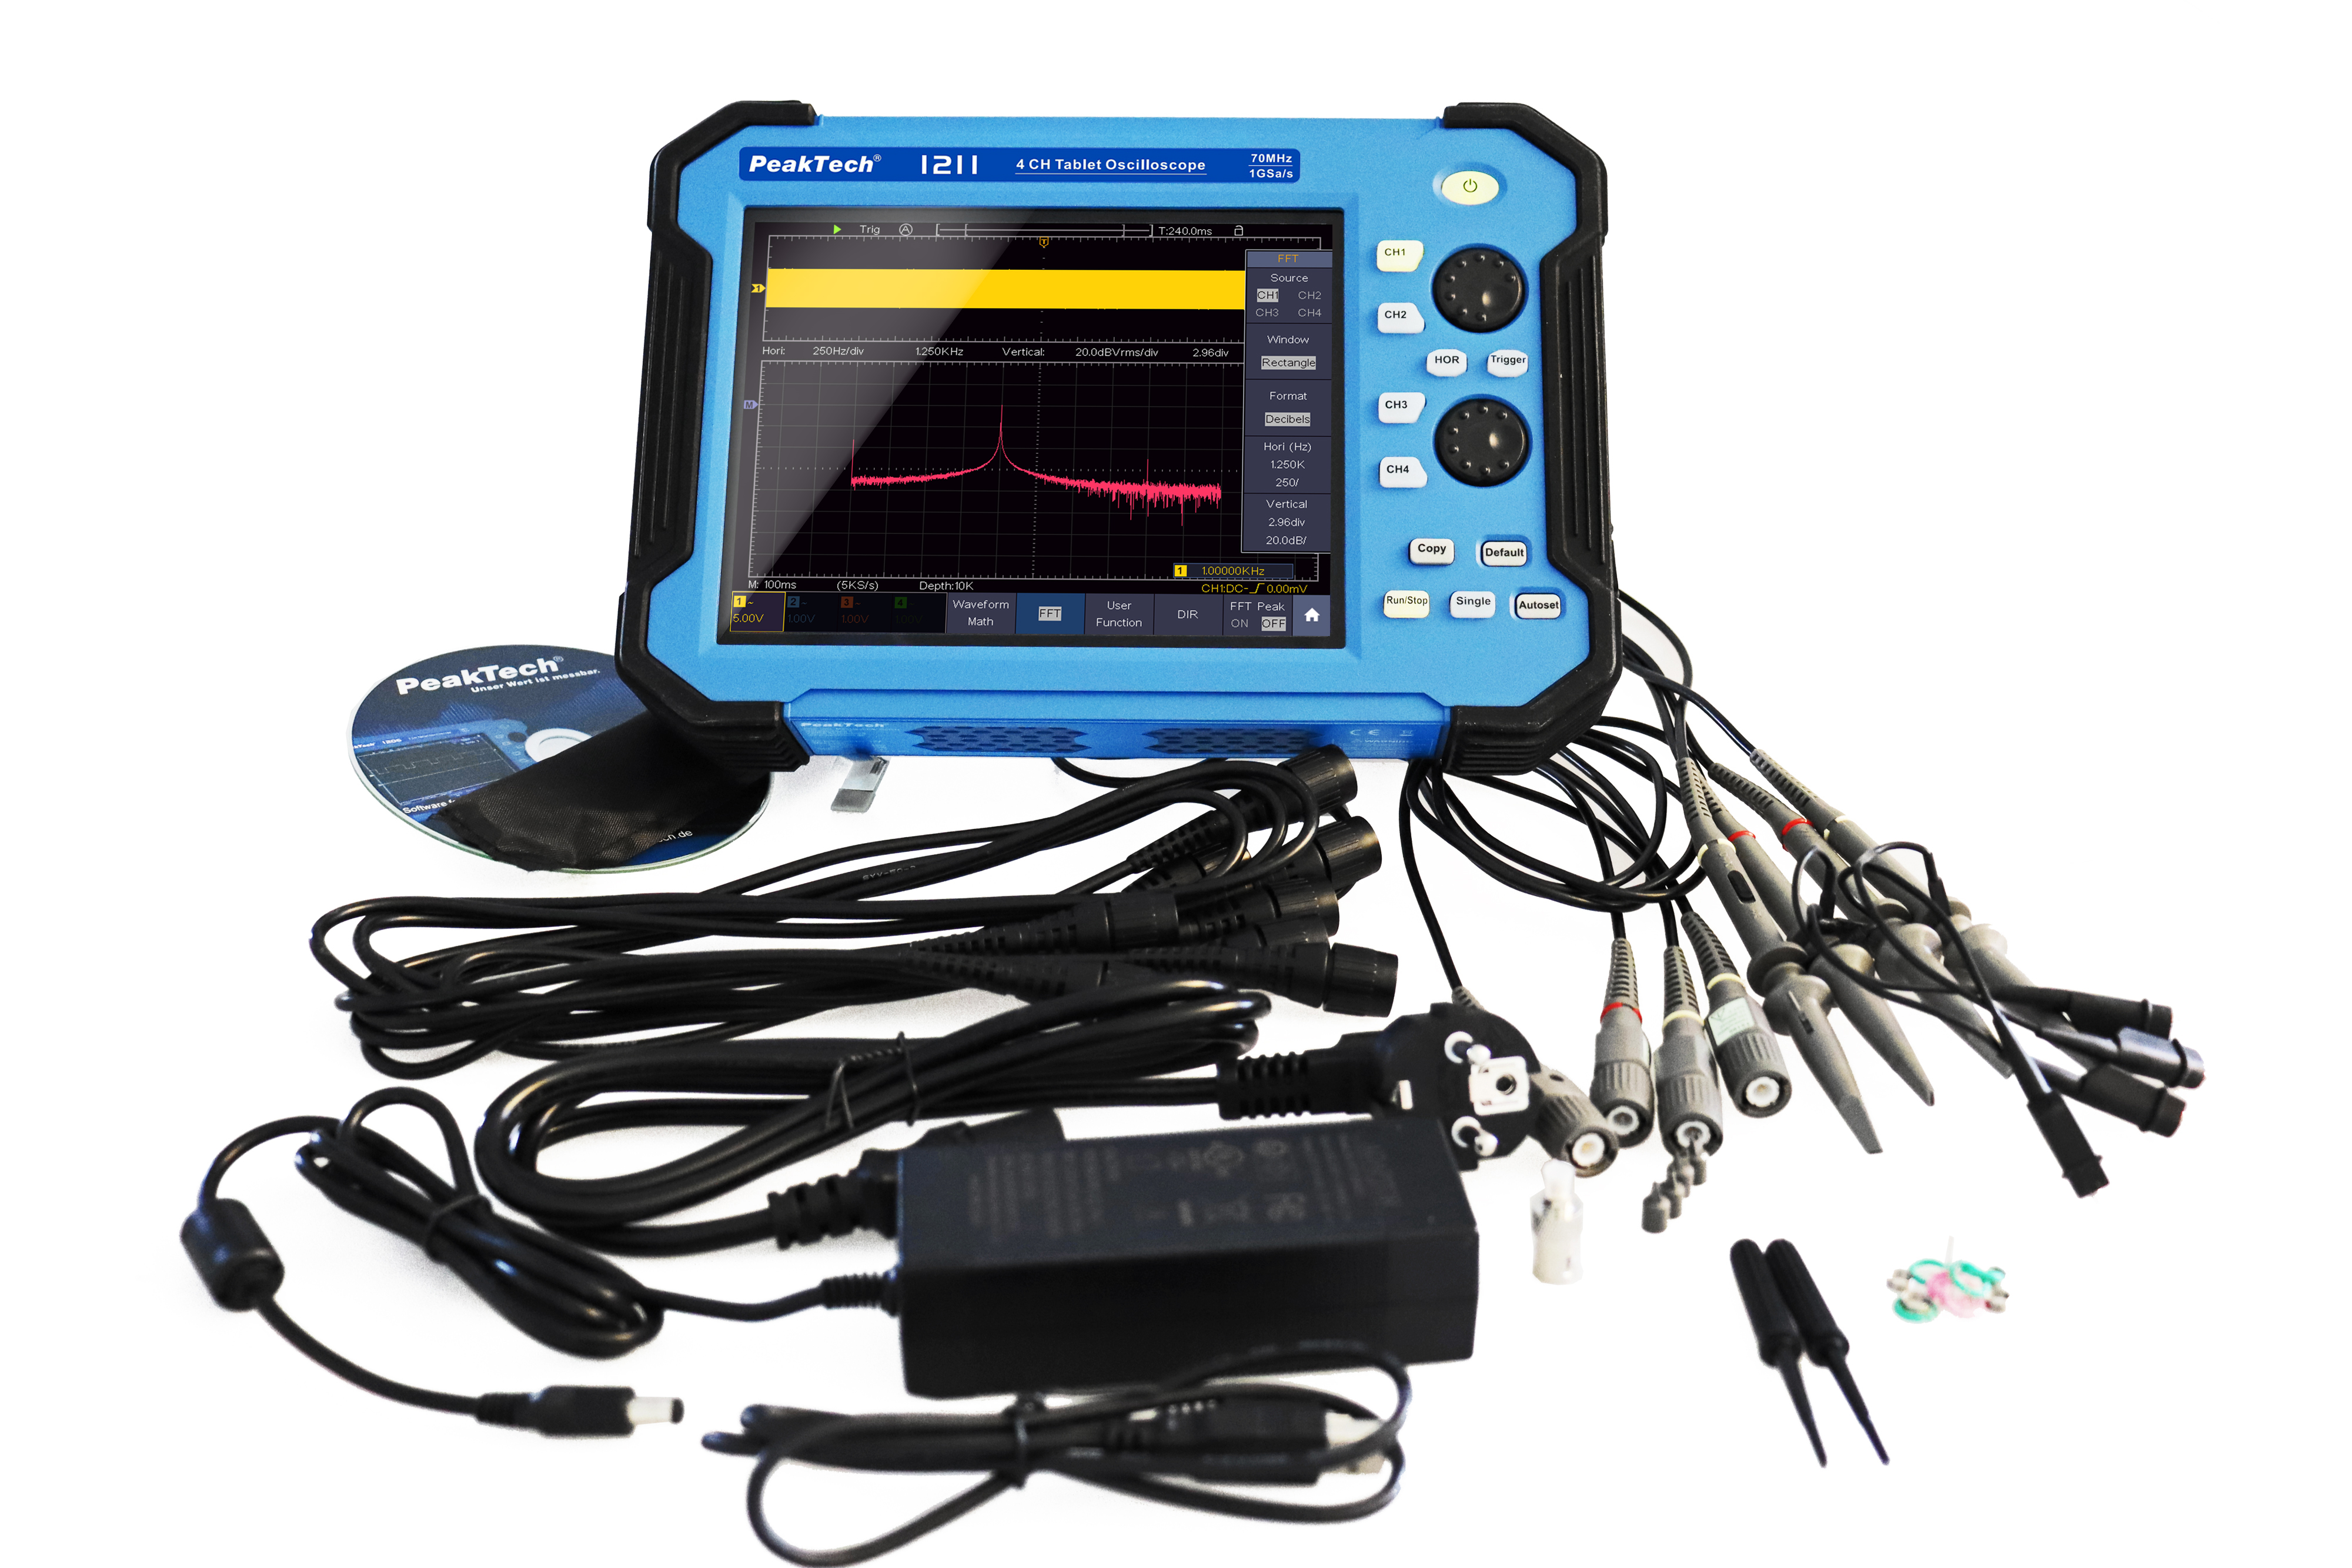 «PeakTech® P 1211» 70 MHz / 4 CH, 1 GS/s tablet oscilloscope